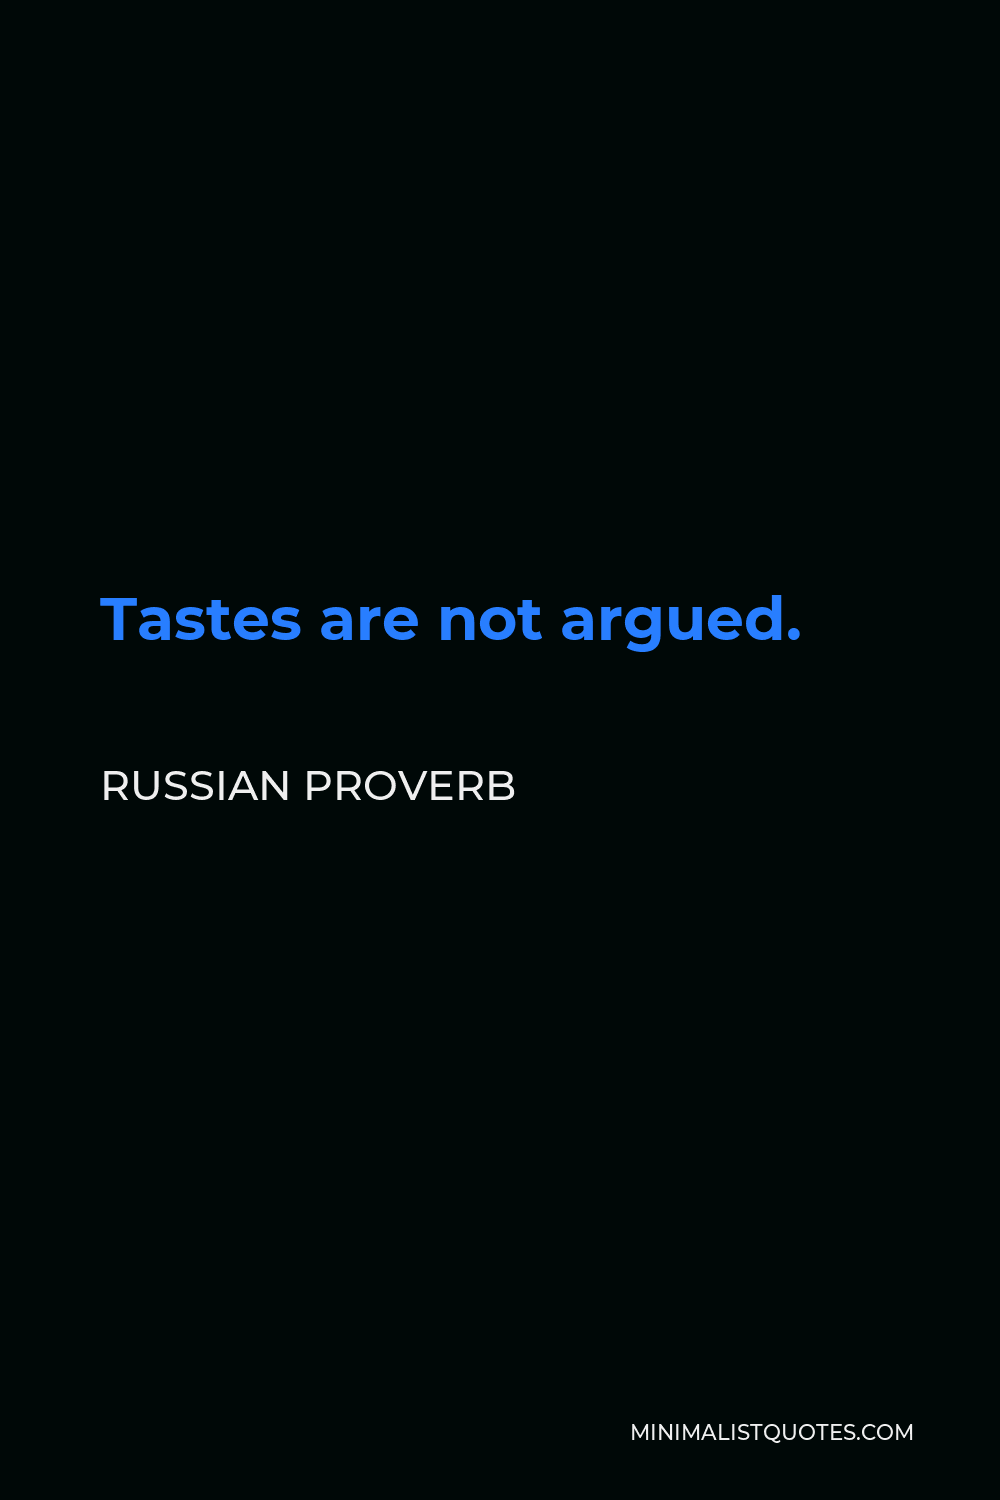 Russian Proverb Quote - Tastes are not argued.